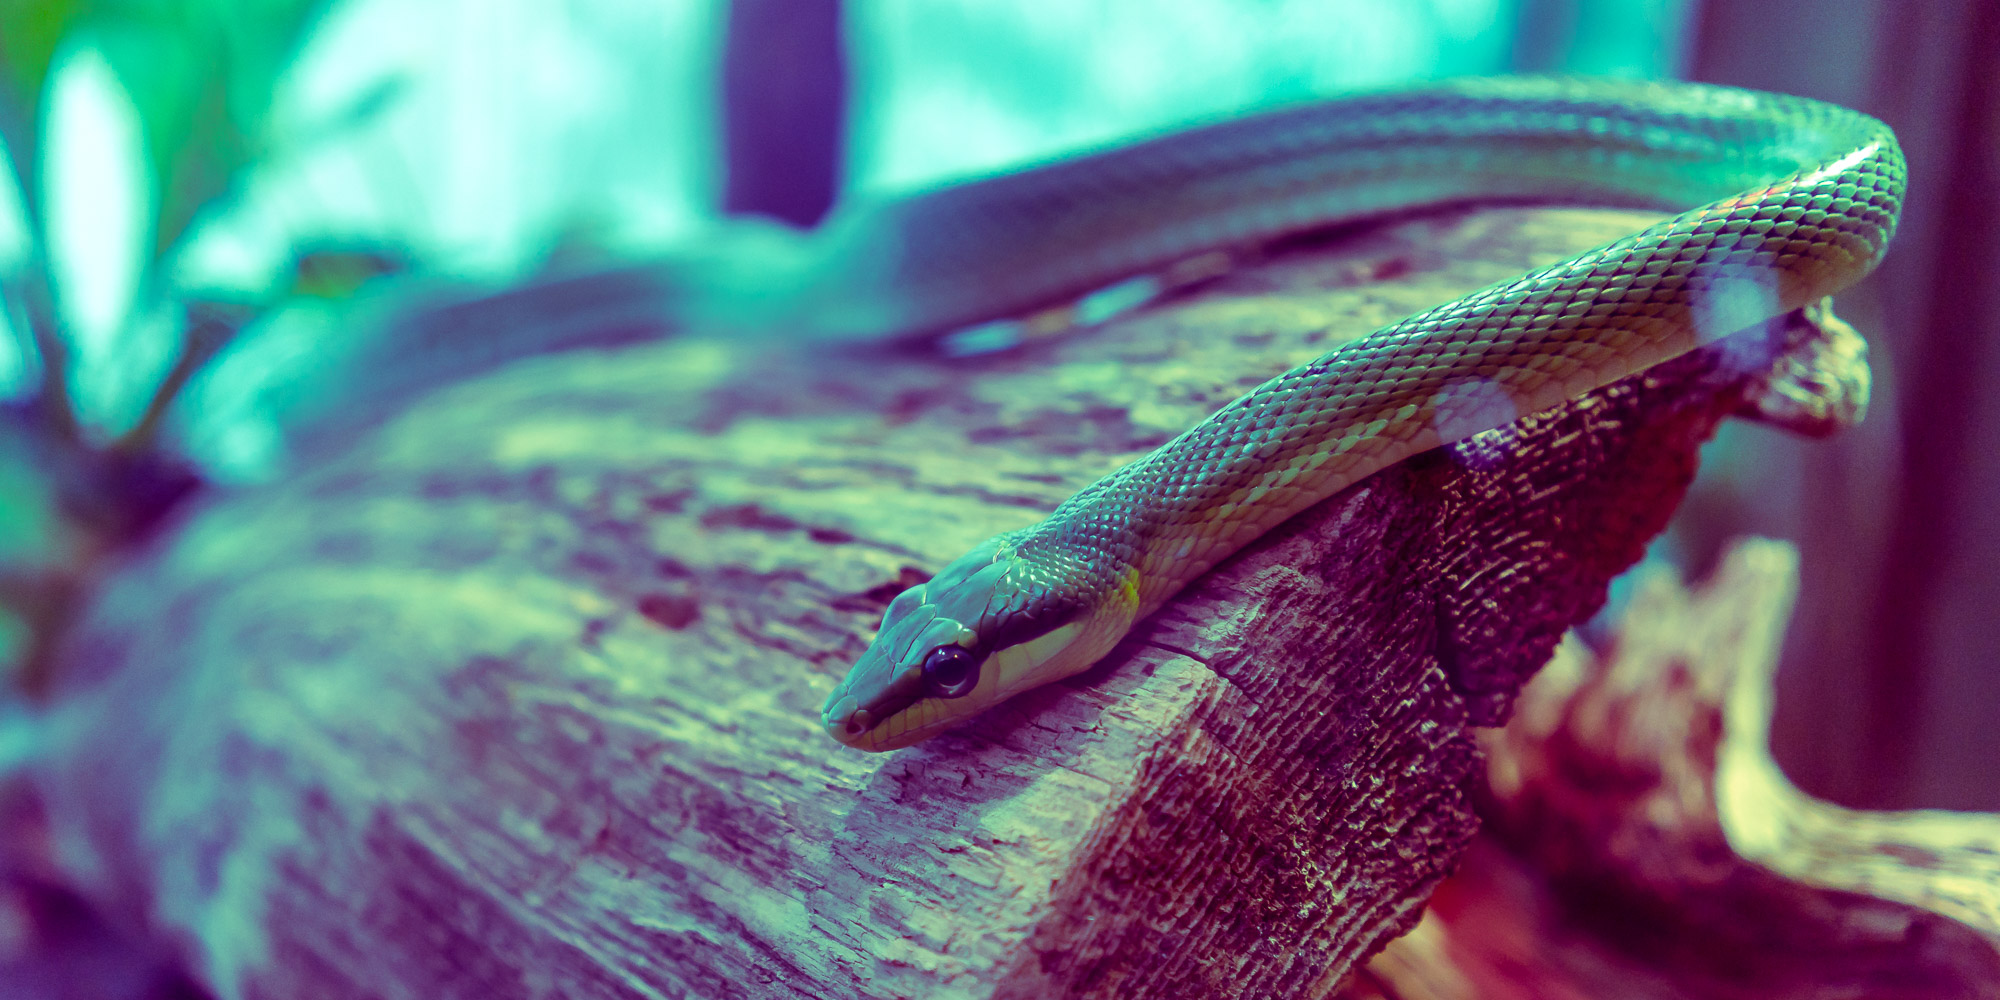 A close up of a thin green snake that is lying on a dead log. The image has an filter applied which changes the colors to appear more dreamy.